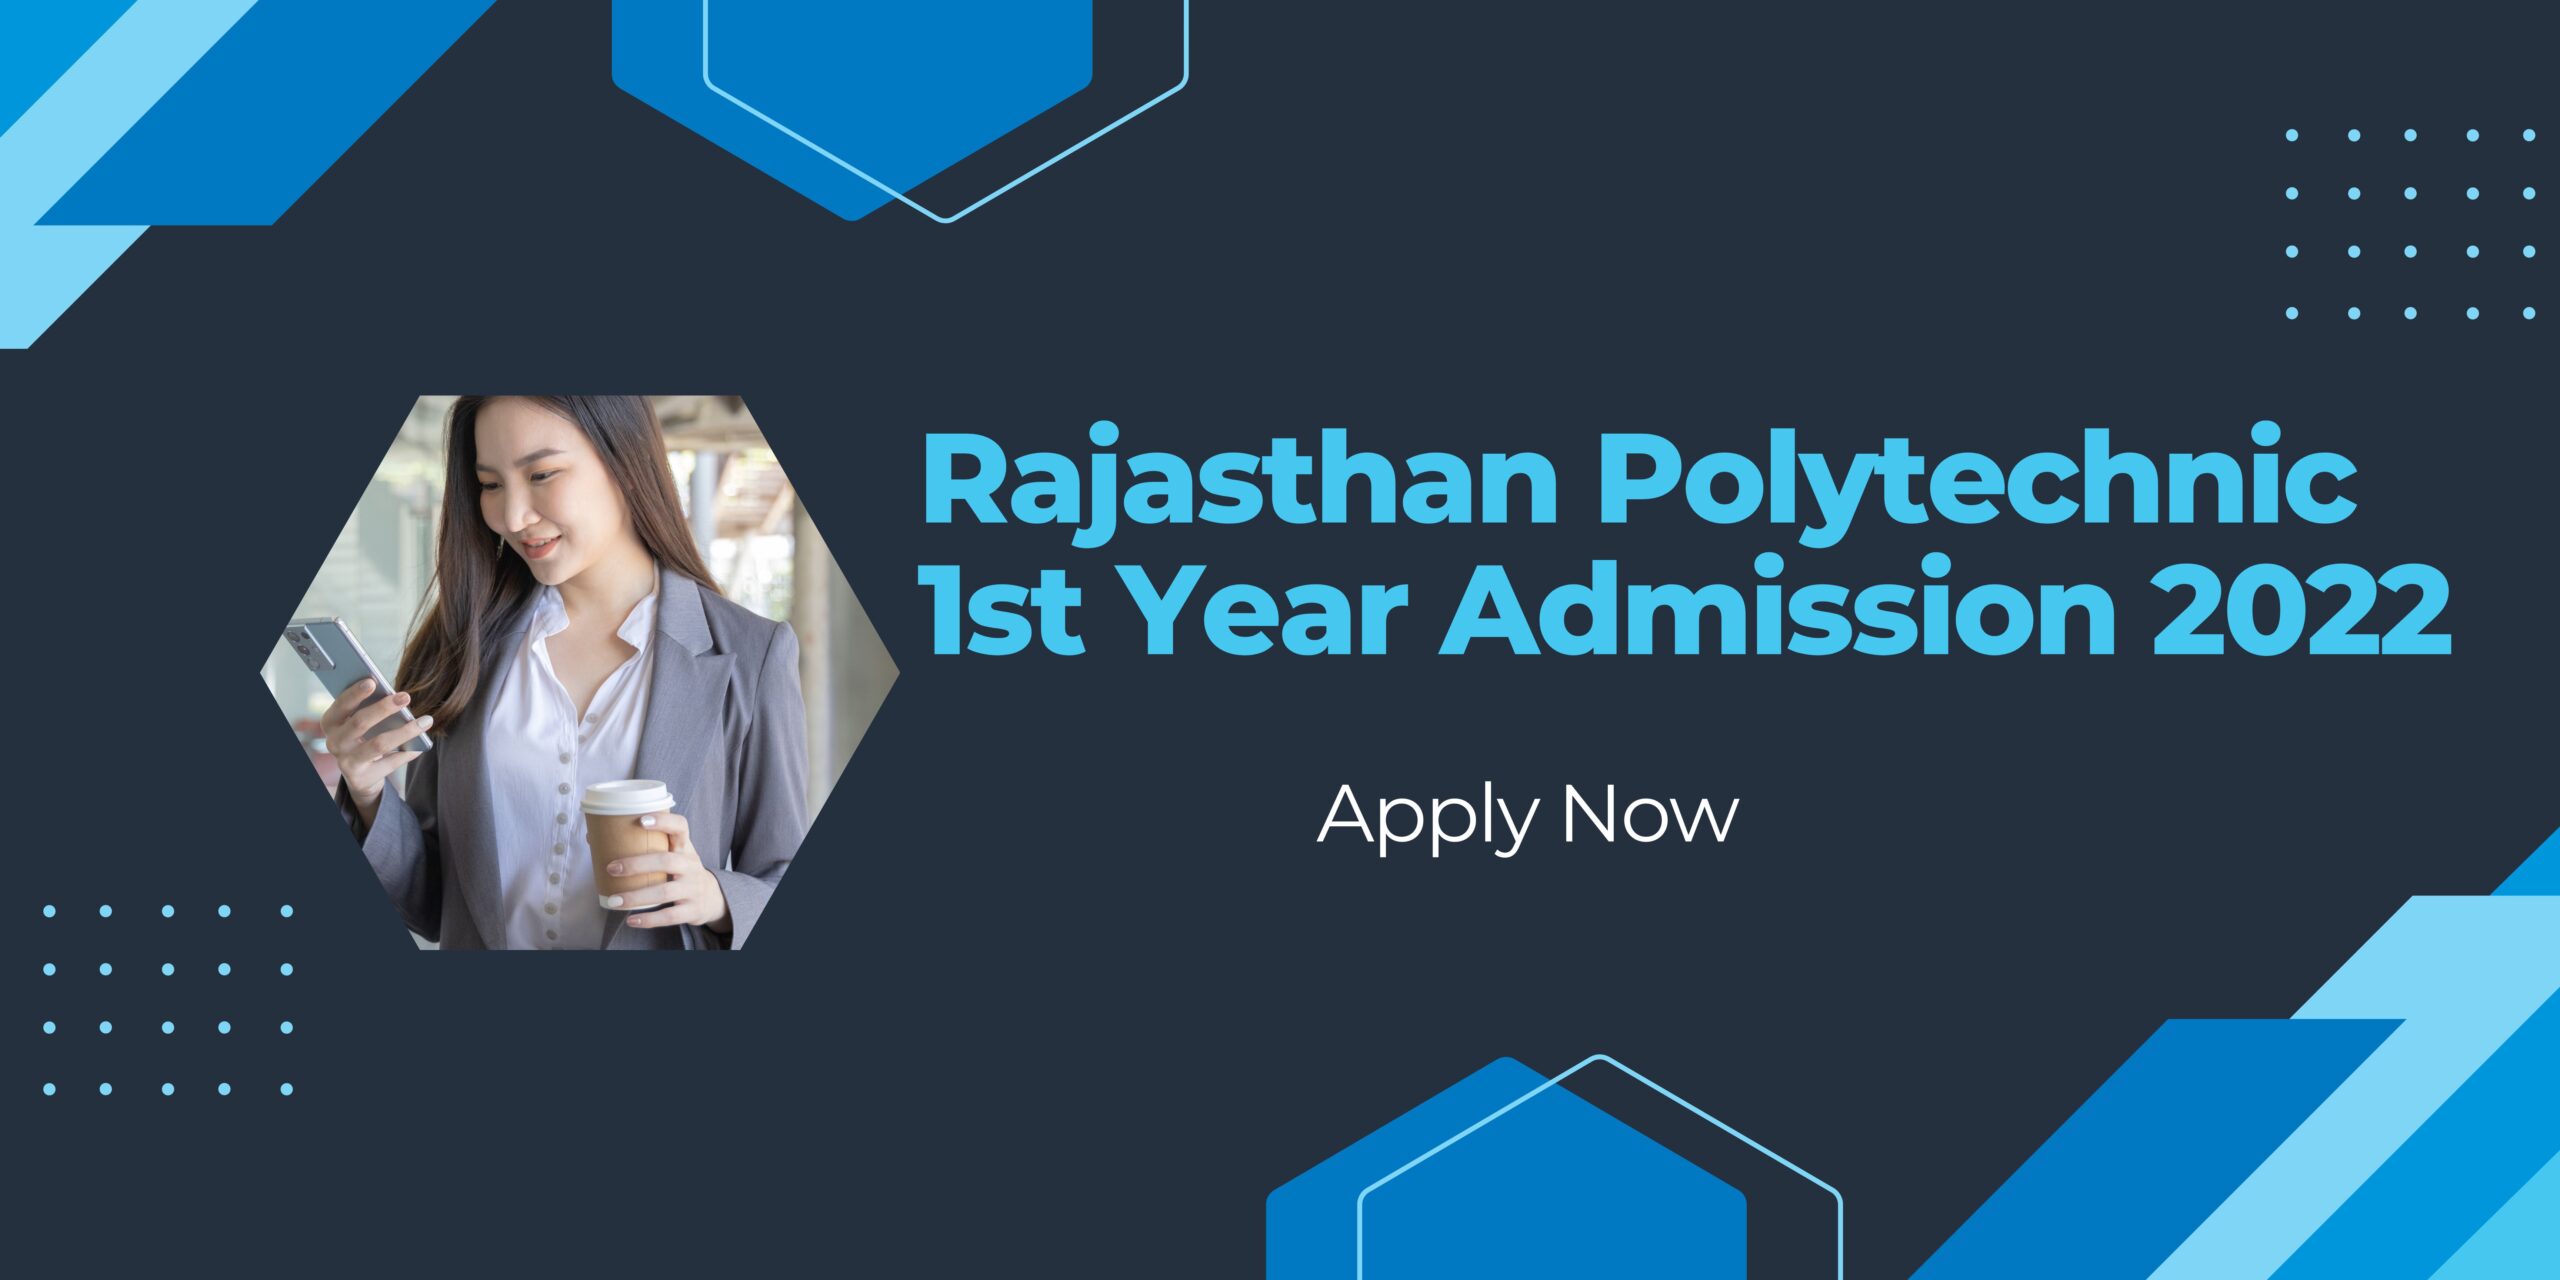 Rajasthan Polytechnic 1st Year Admission 2022